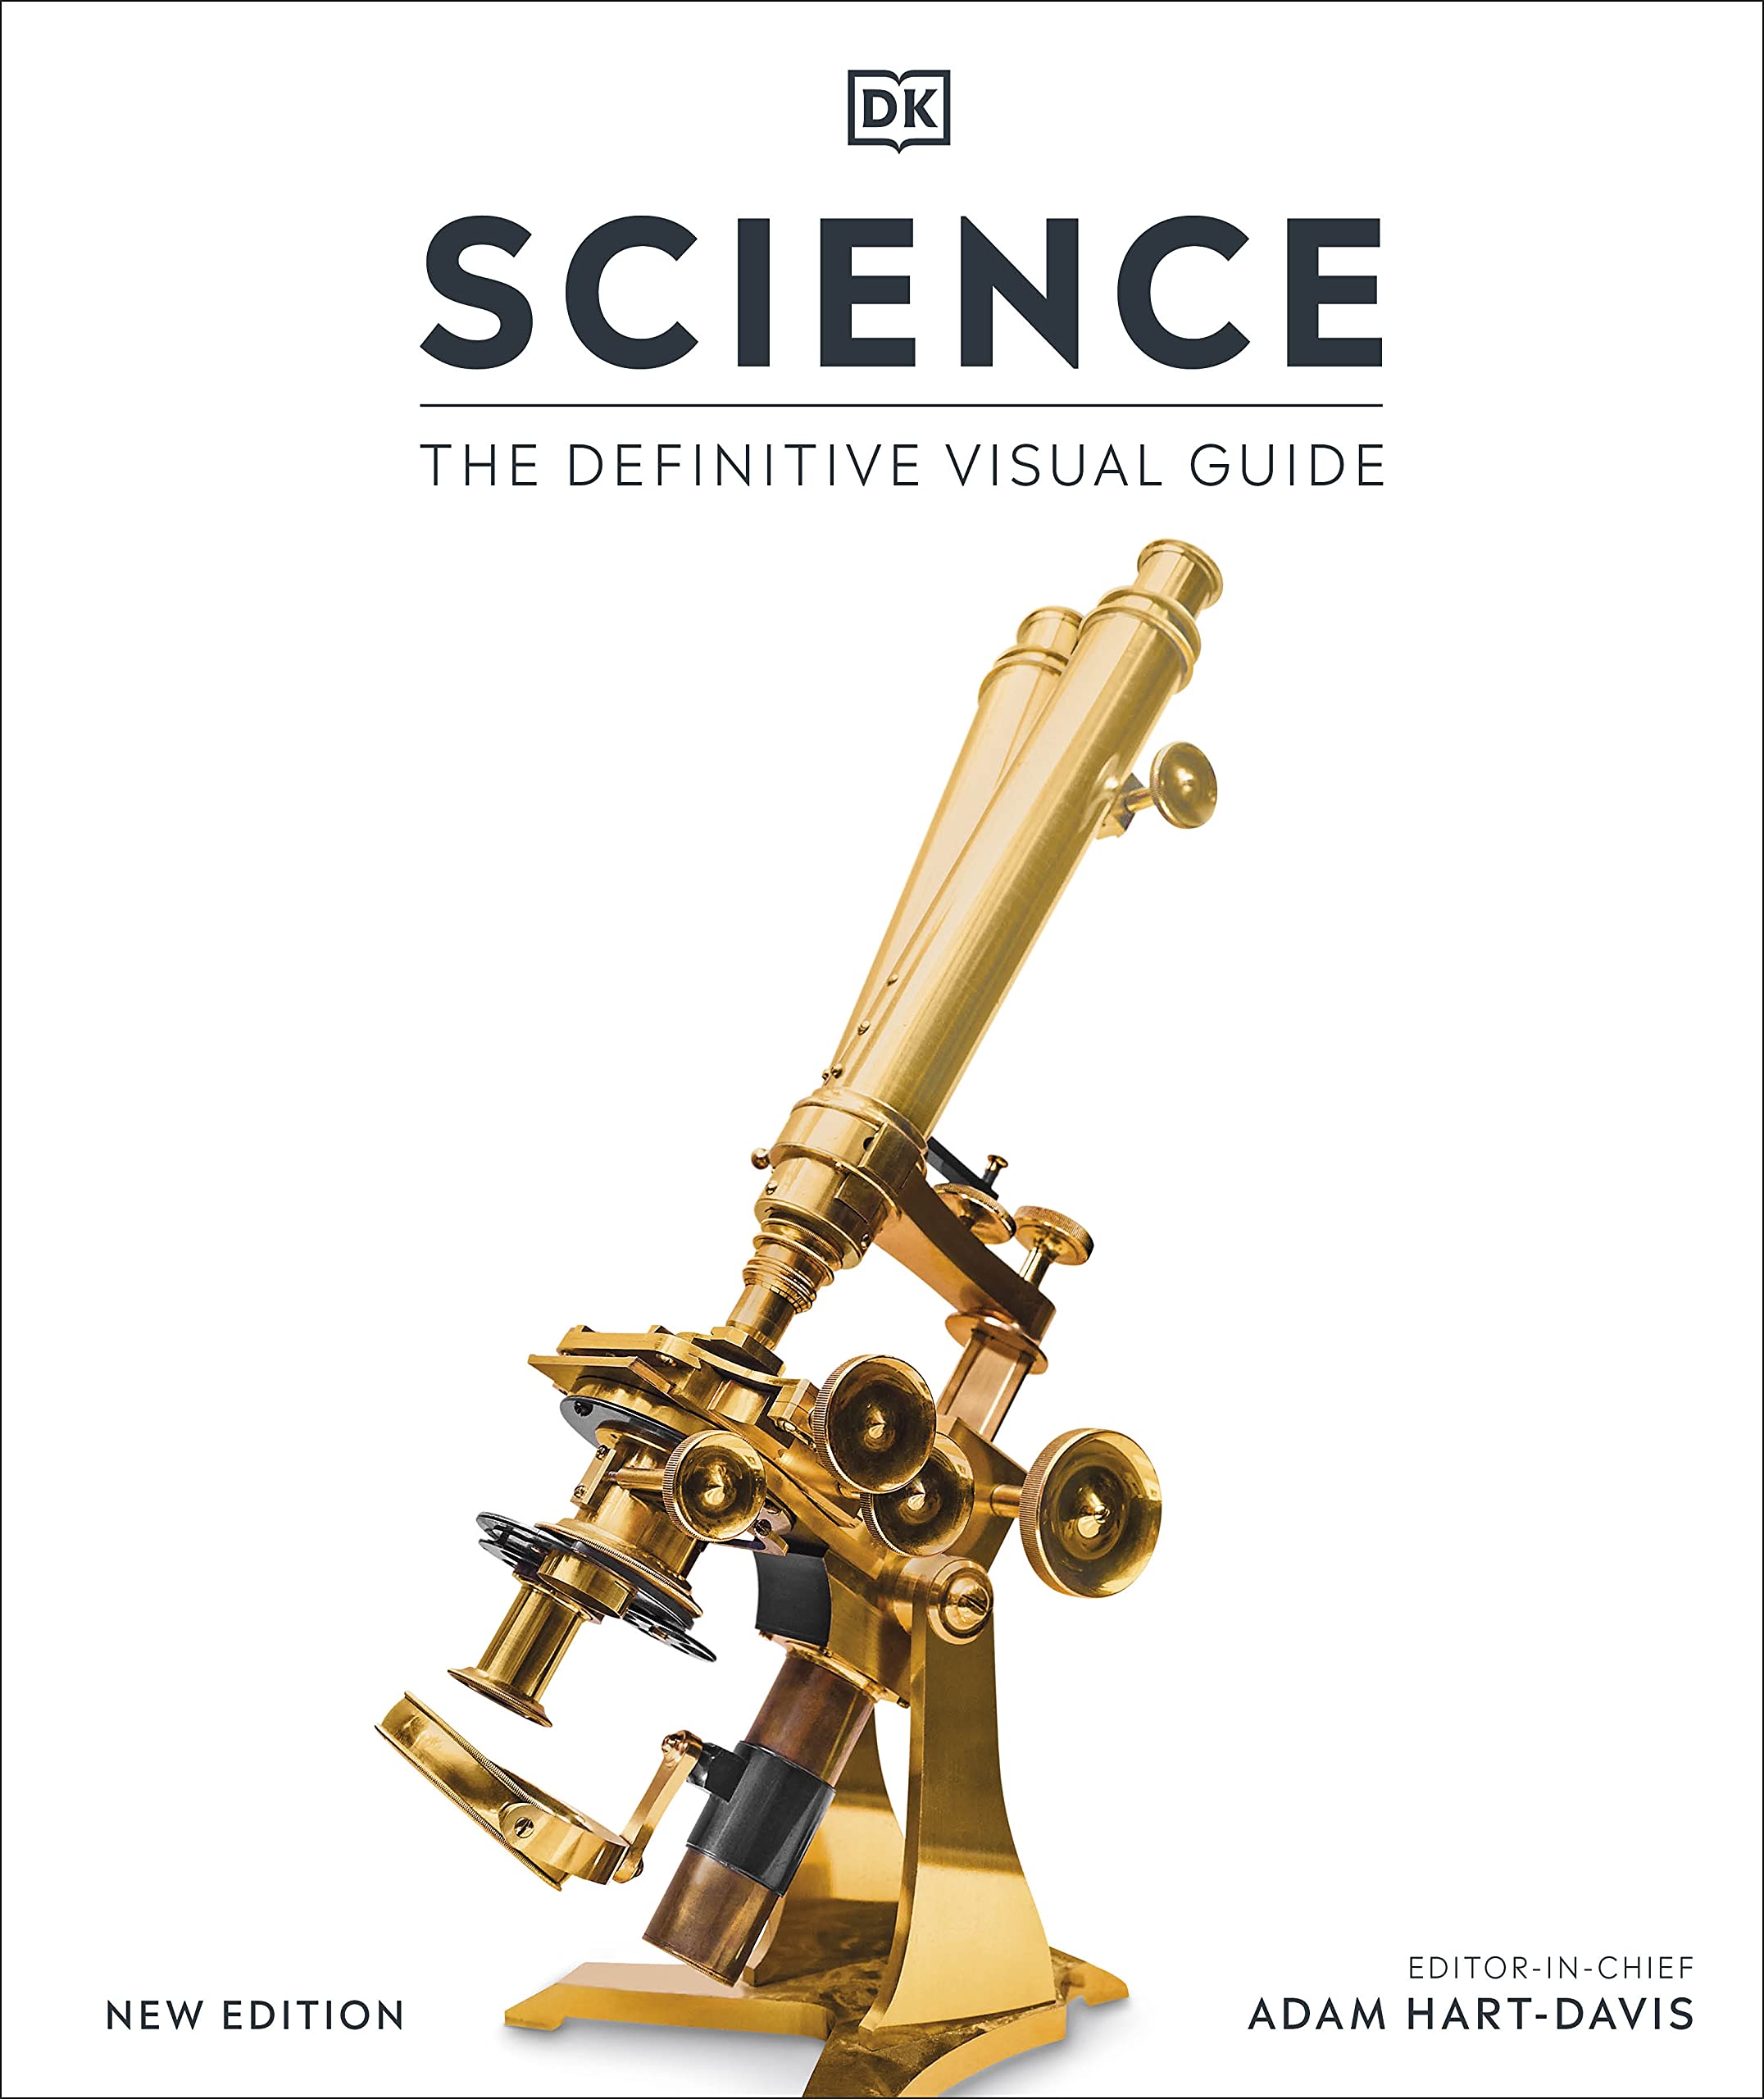 Science the definitive visual guide